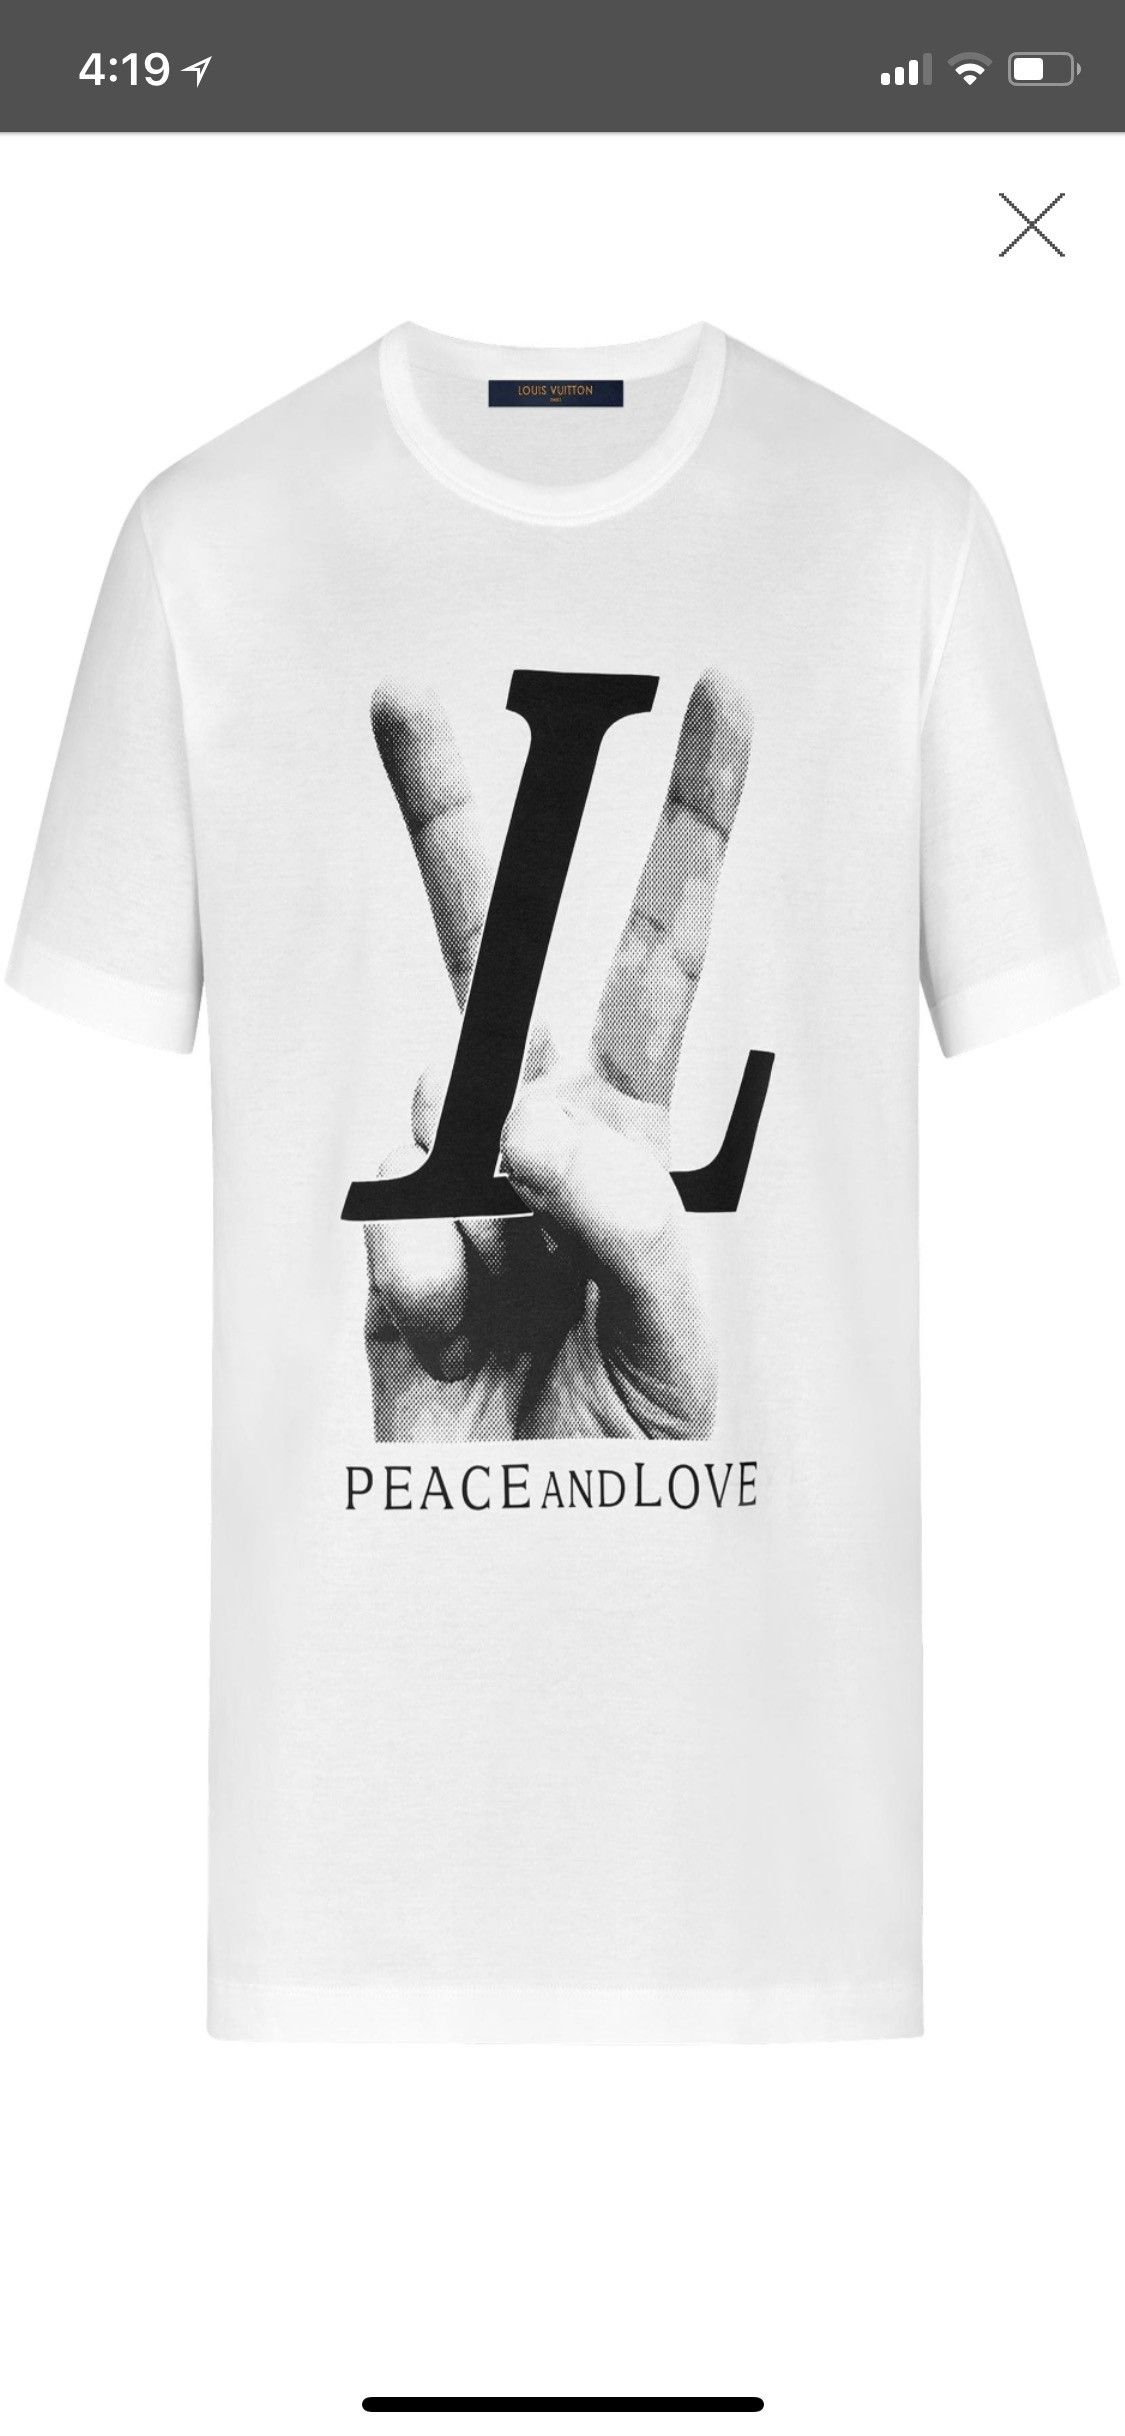 Louis Vuitton Peace and Love Sweat Shirt